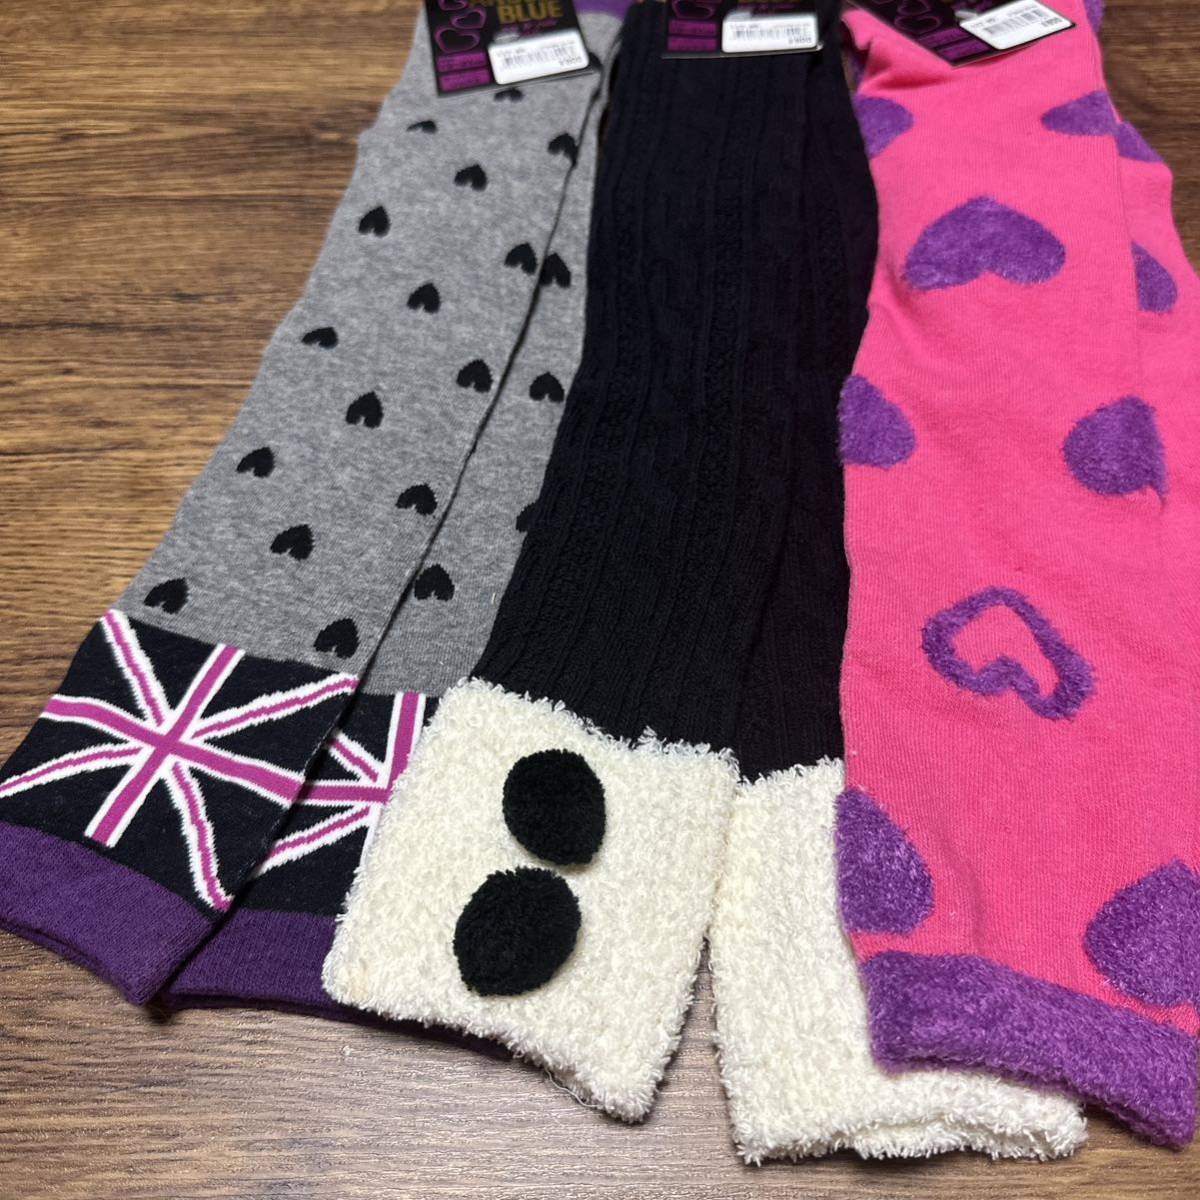  new goods Angel Blue over knee-high 3 pairs set cable braided Heart socks 19~21 elementary school student girl Kids going to school for children ANGEL BLUE